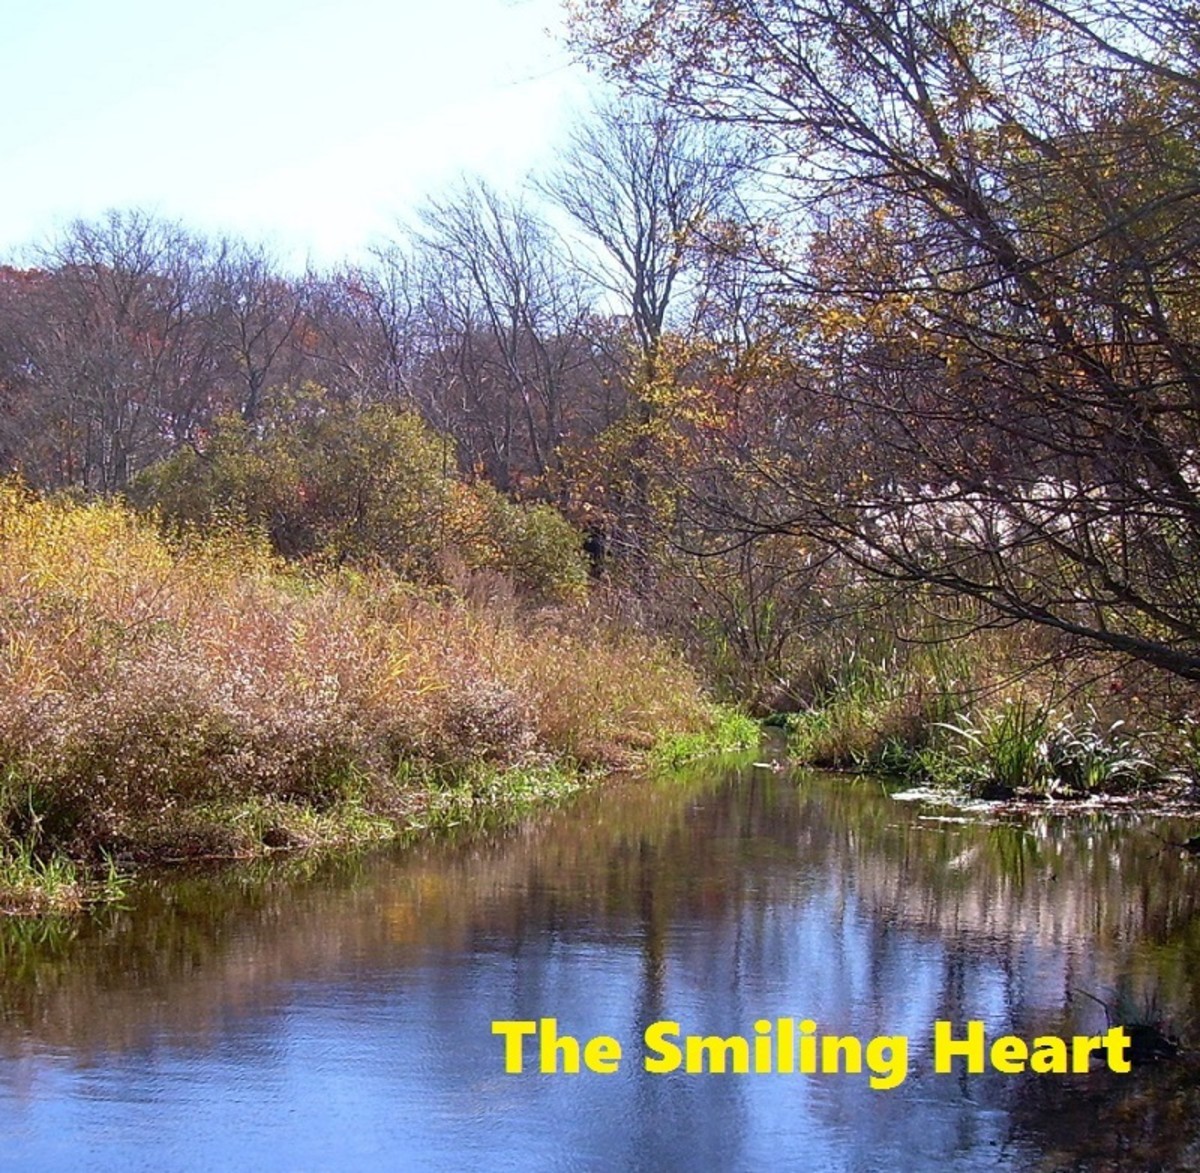 The Smiling Heart